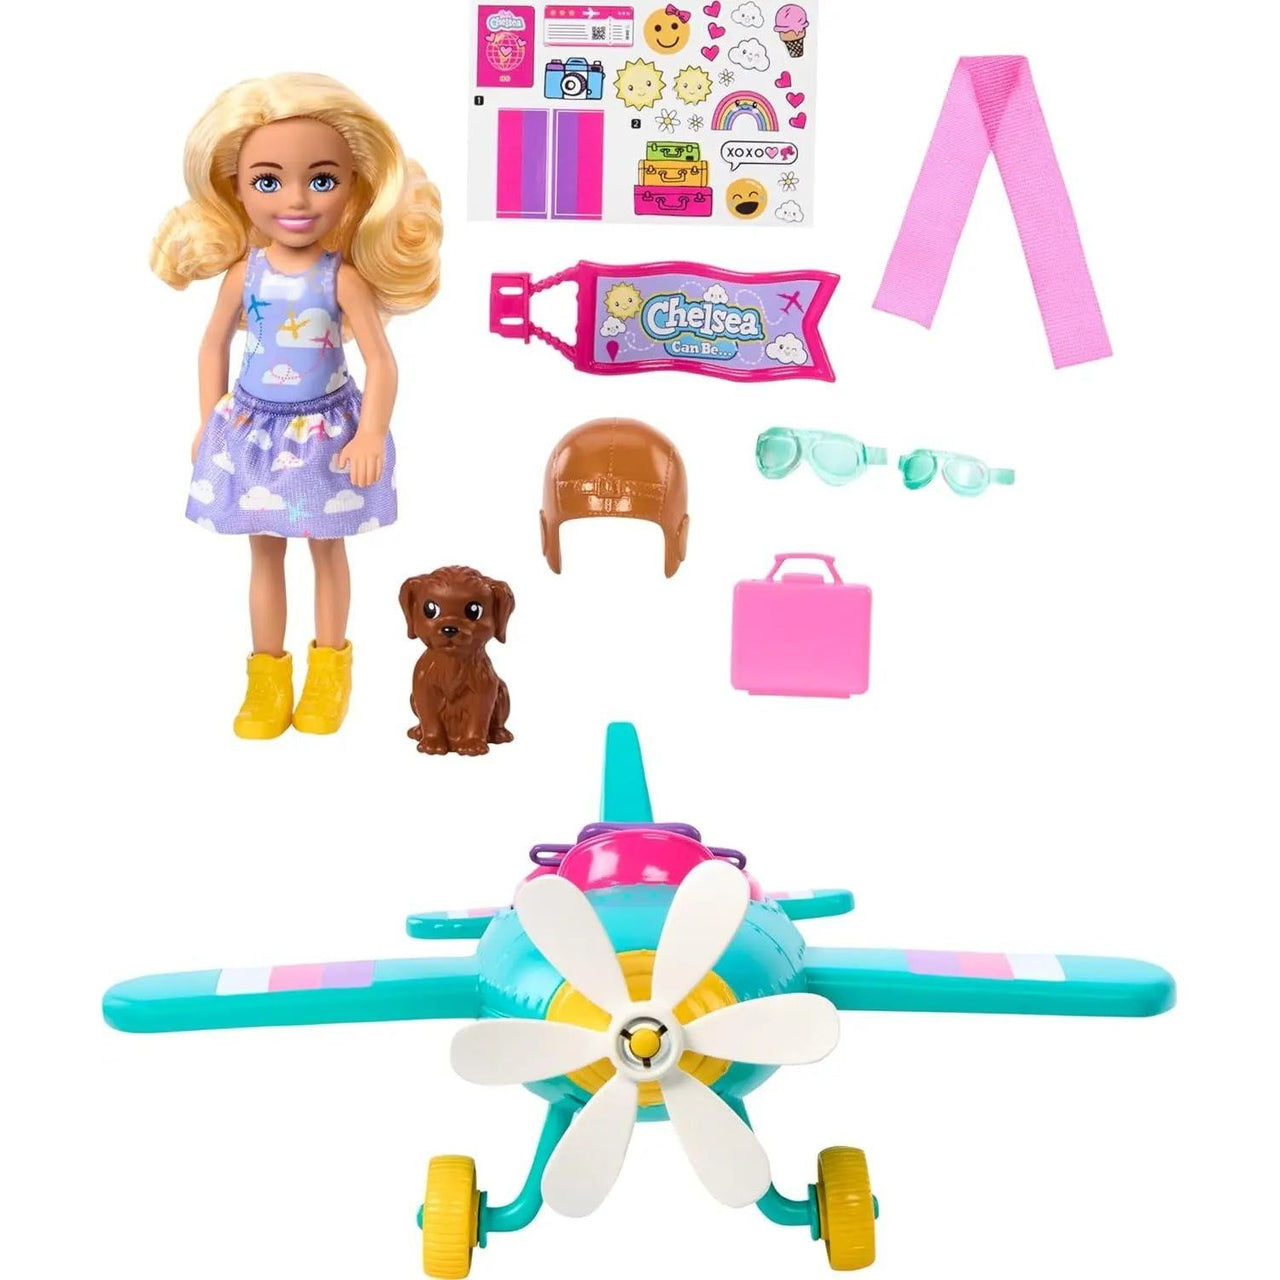 Barbie Chelsea Can Be Doll & Plane Playset Barbie